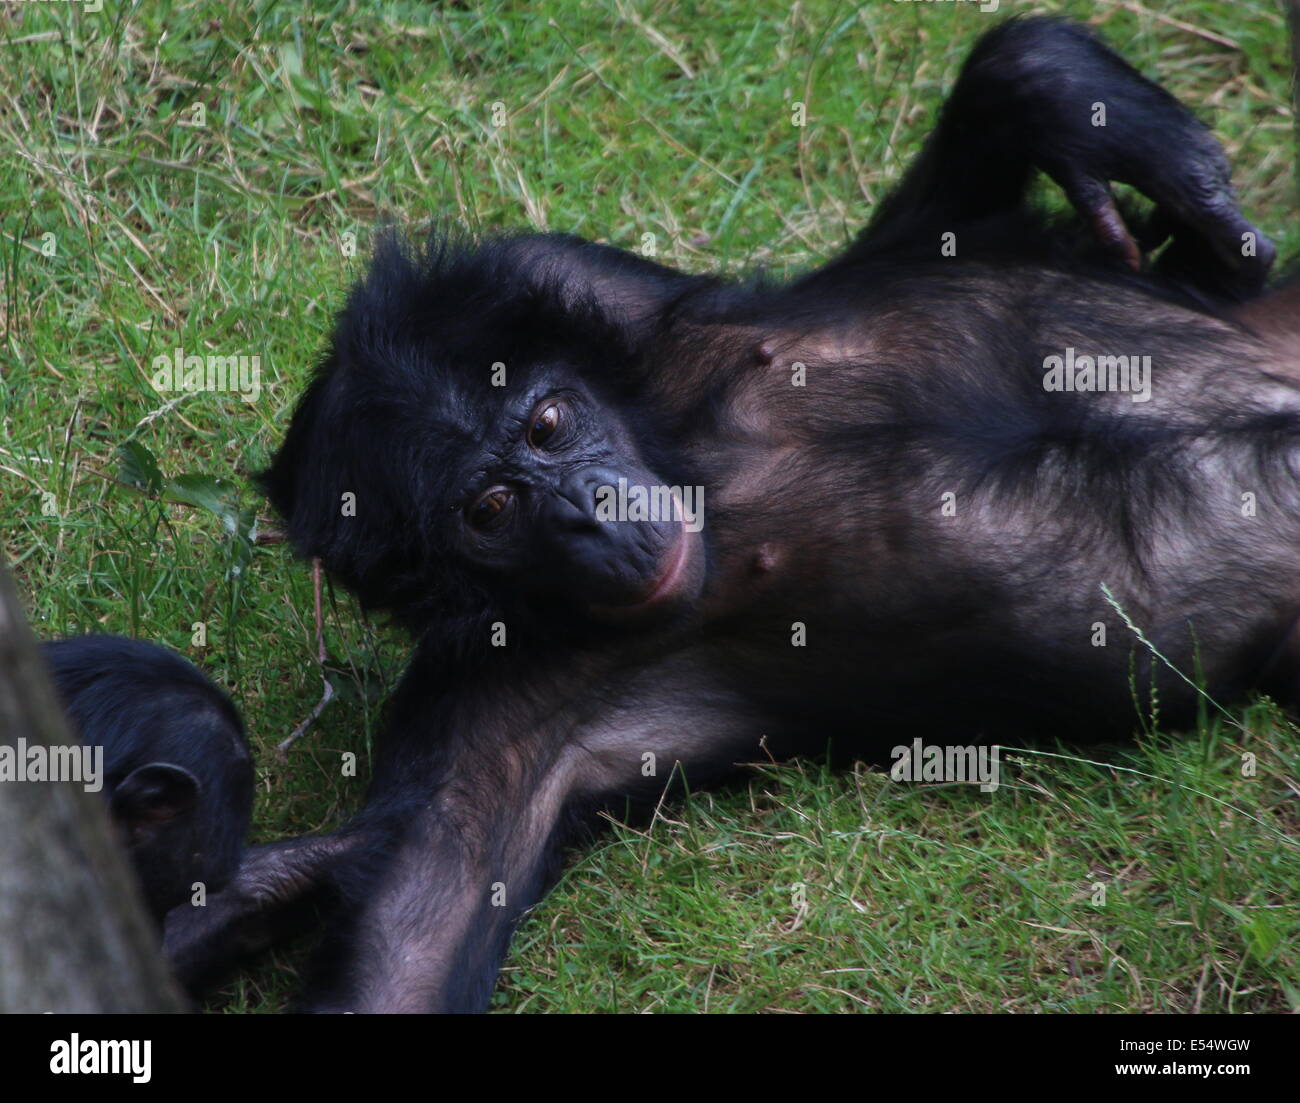 Bonobo or (formerly) Pygmy Chimpanzee (Pan Paniscus) in a natural setting Stock Photo